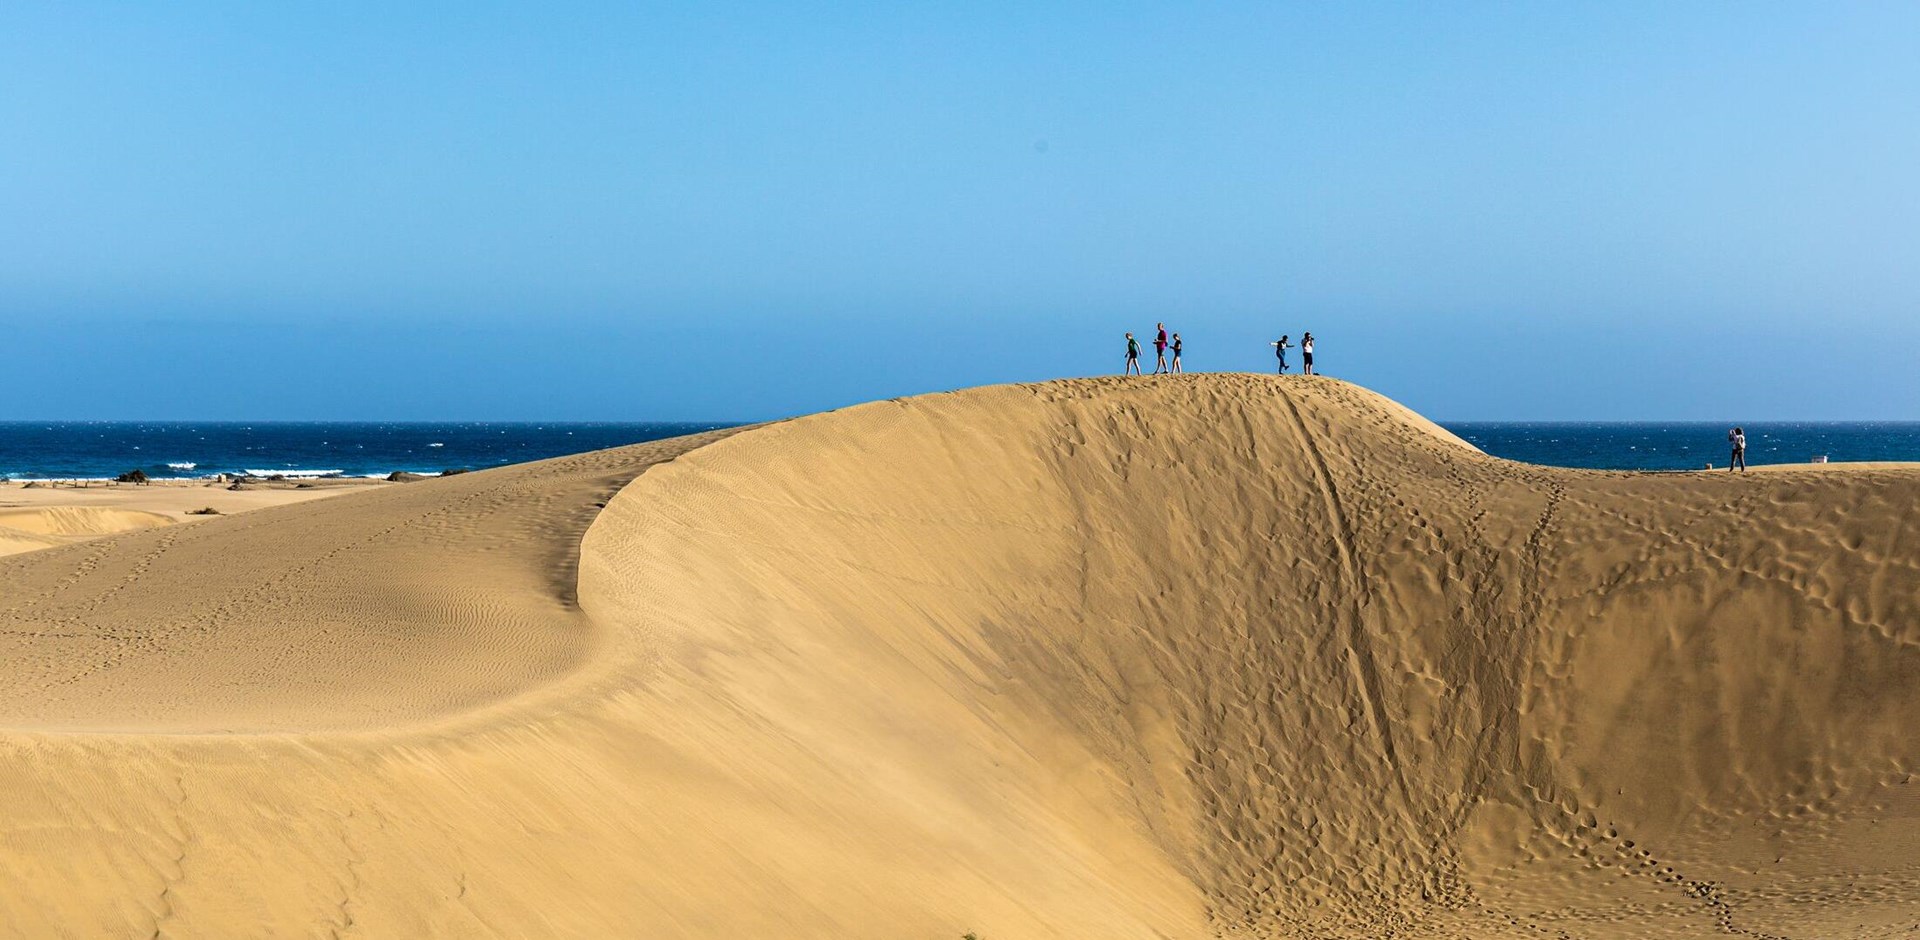 people on the top of sand dune on the beach in maspalomas, gran